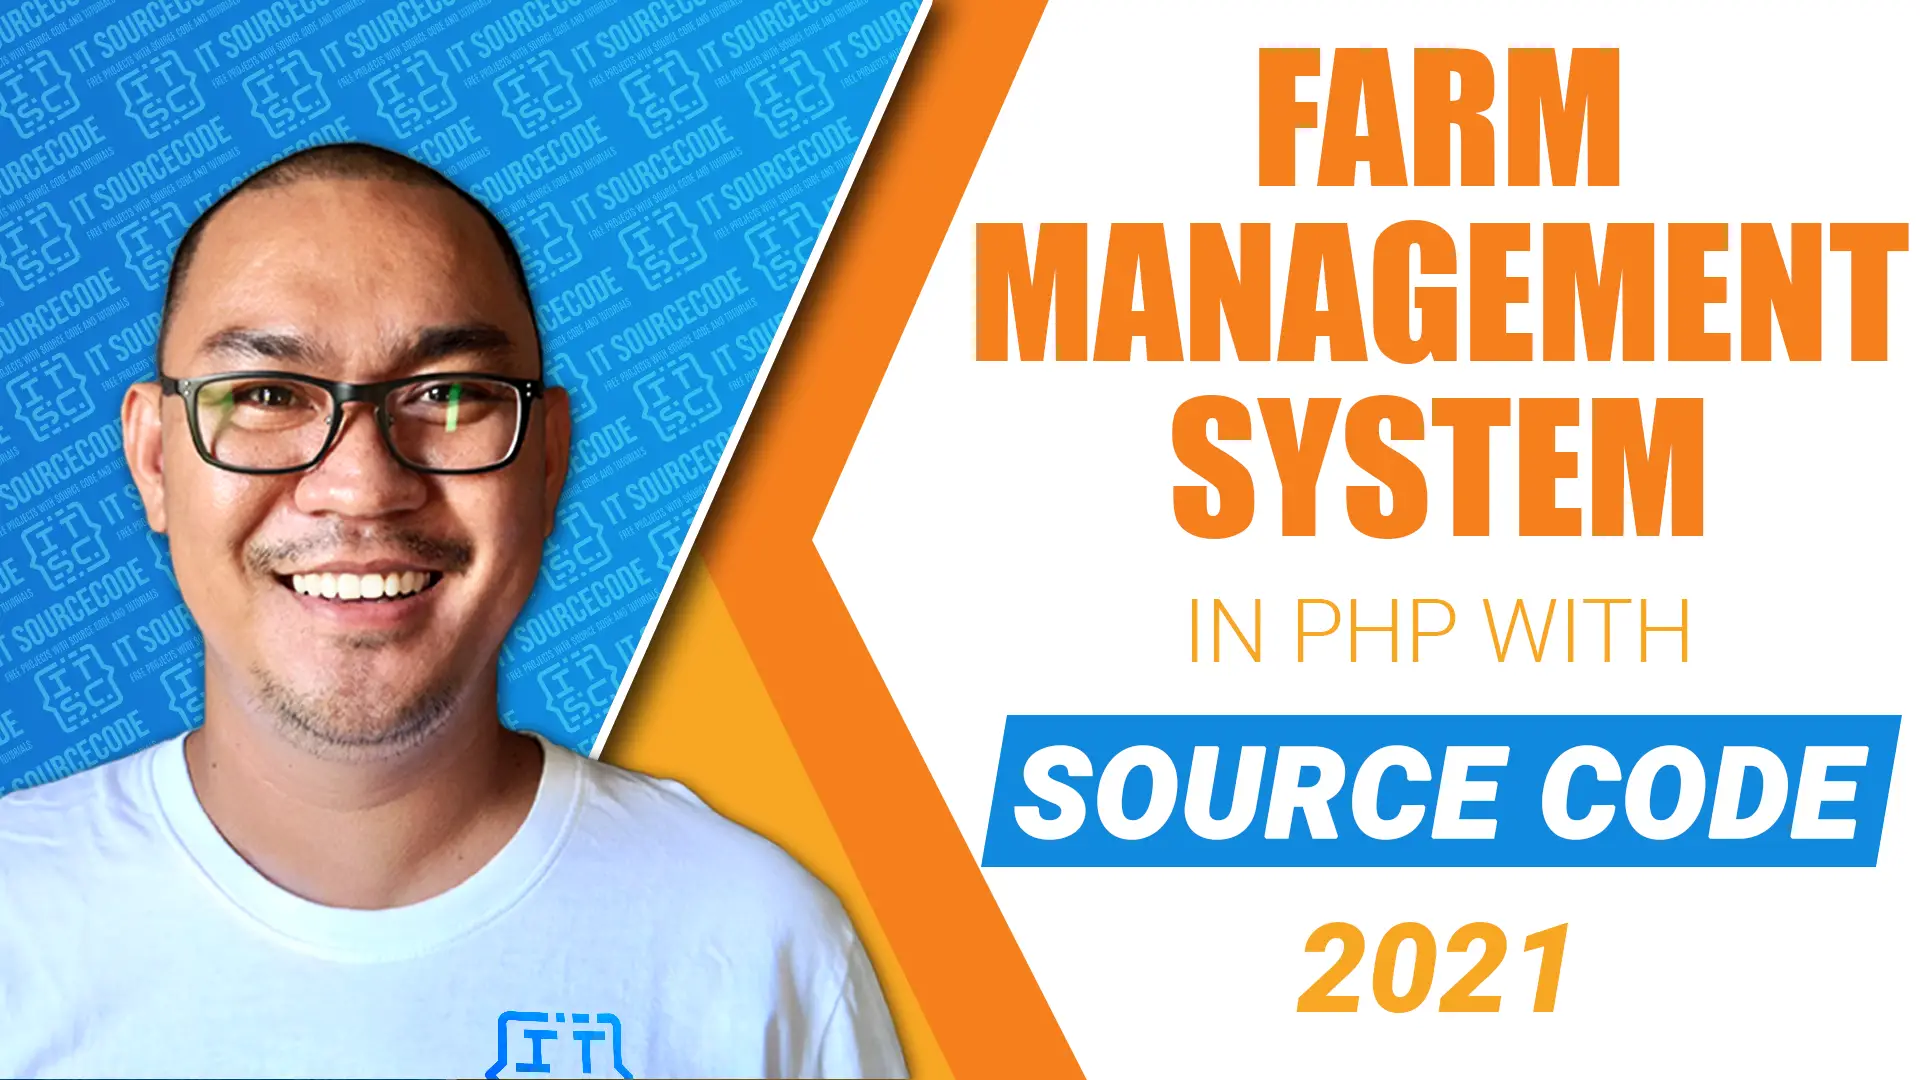 Farm Management System in PHP with Source Code